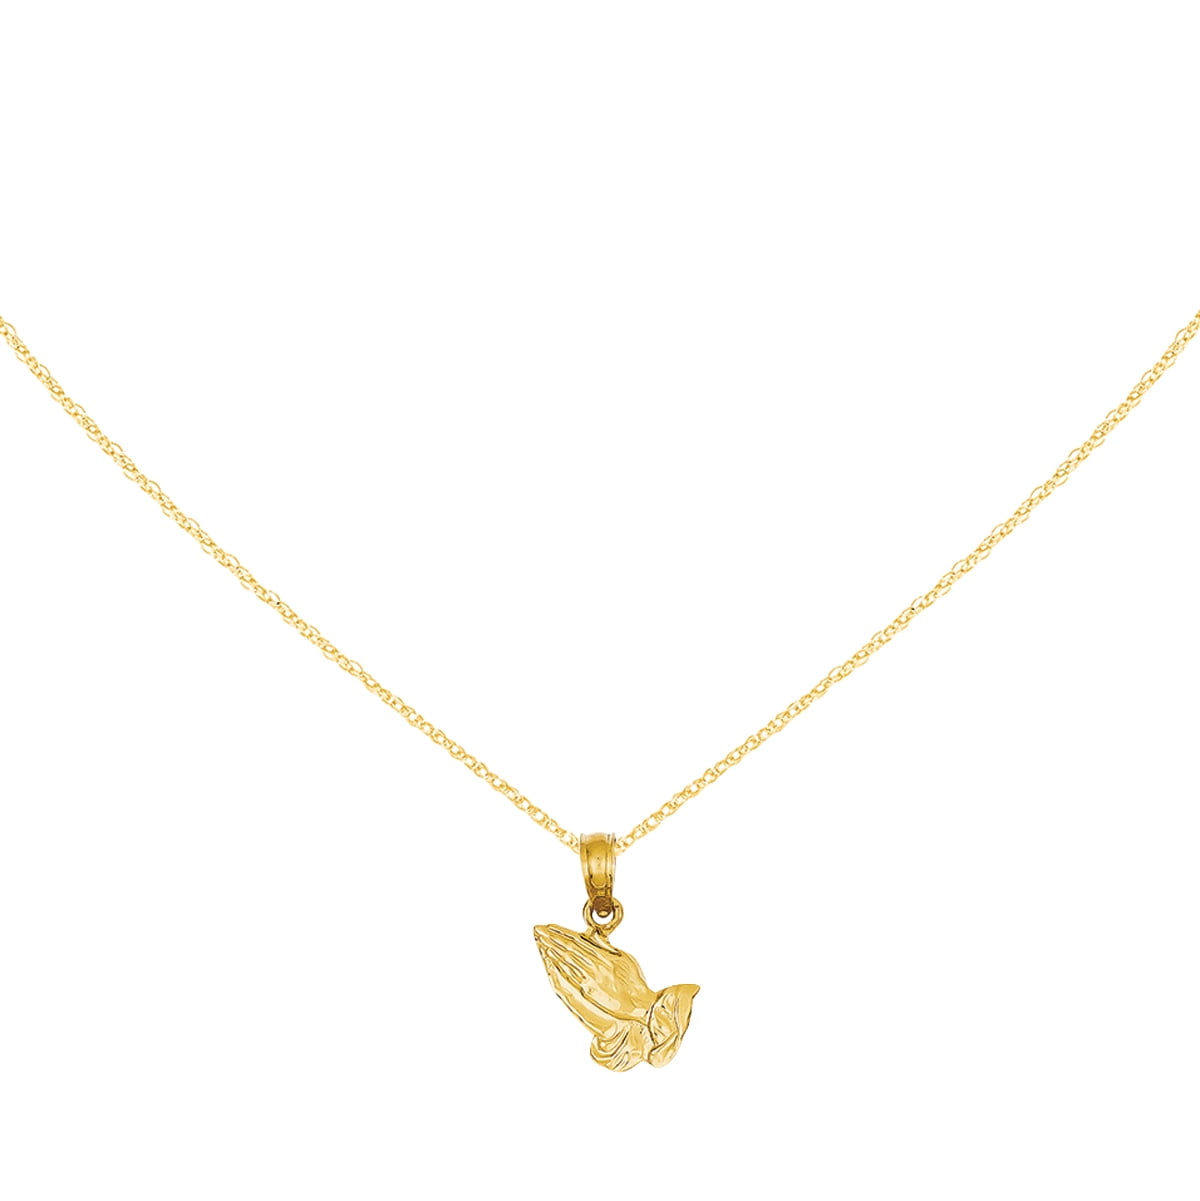 10K Yellow Gold Praying Hands Small Charm Necklace Pendant with 18 Length Chain